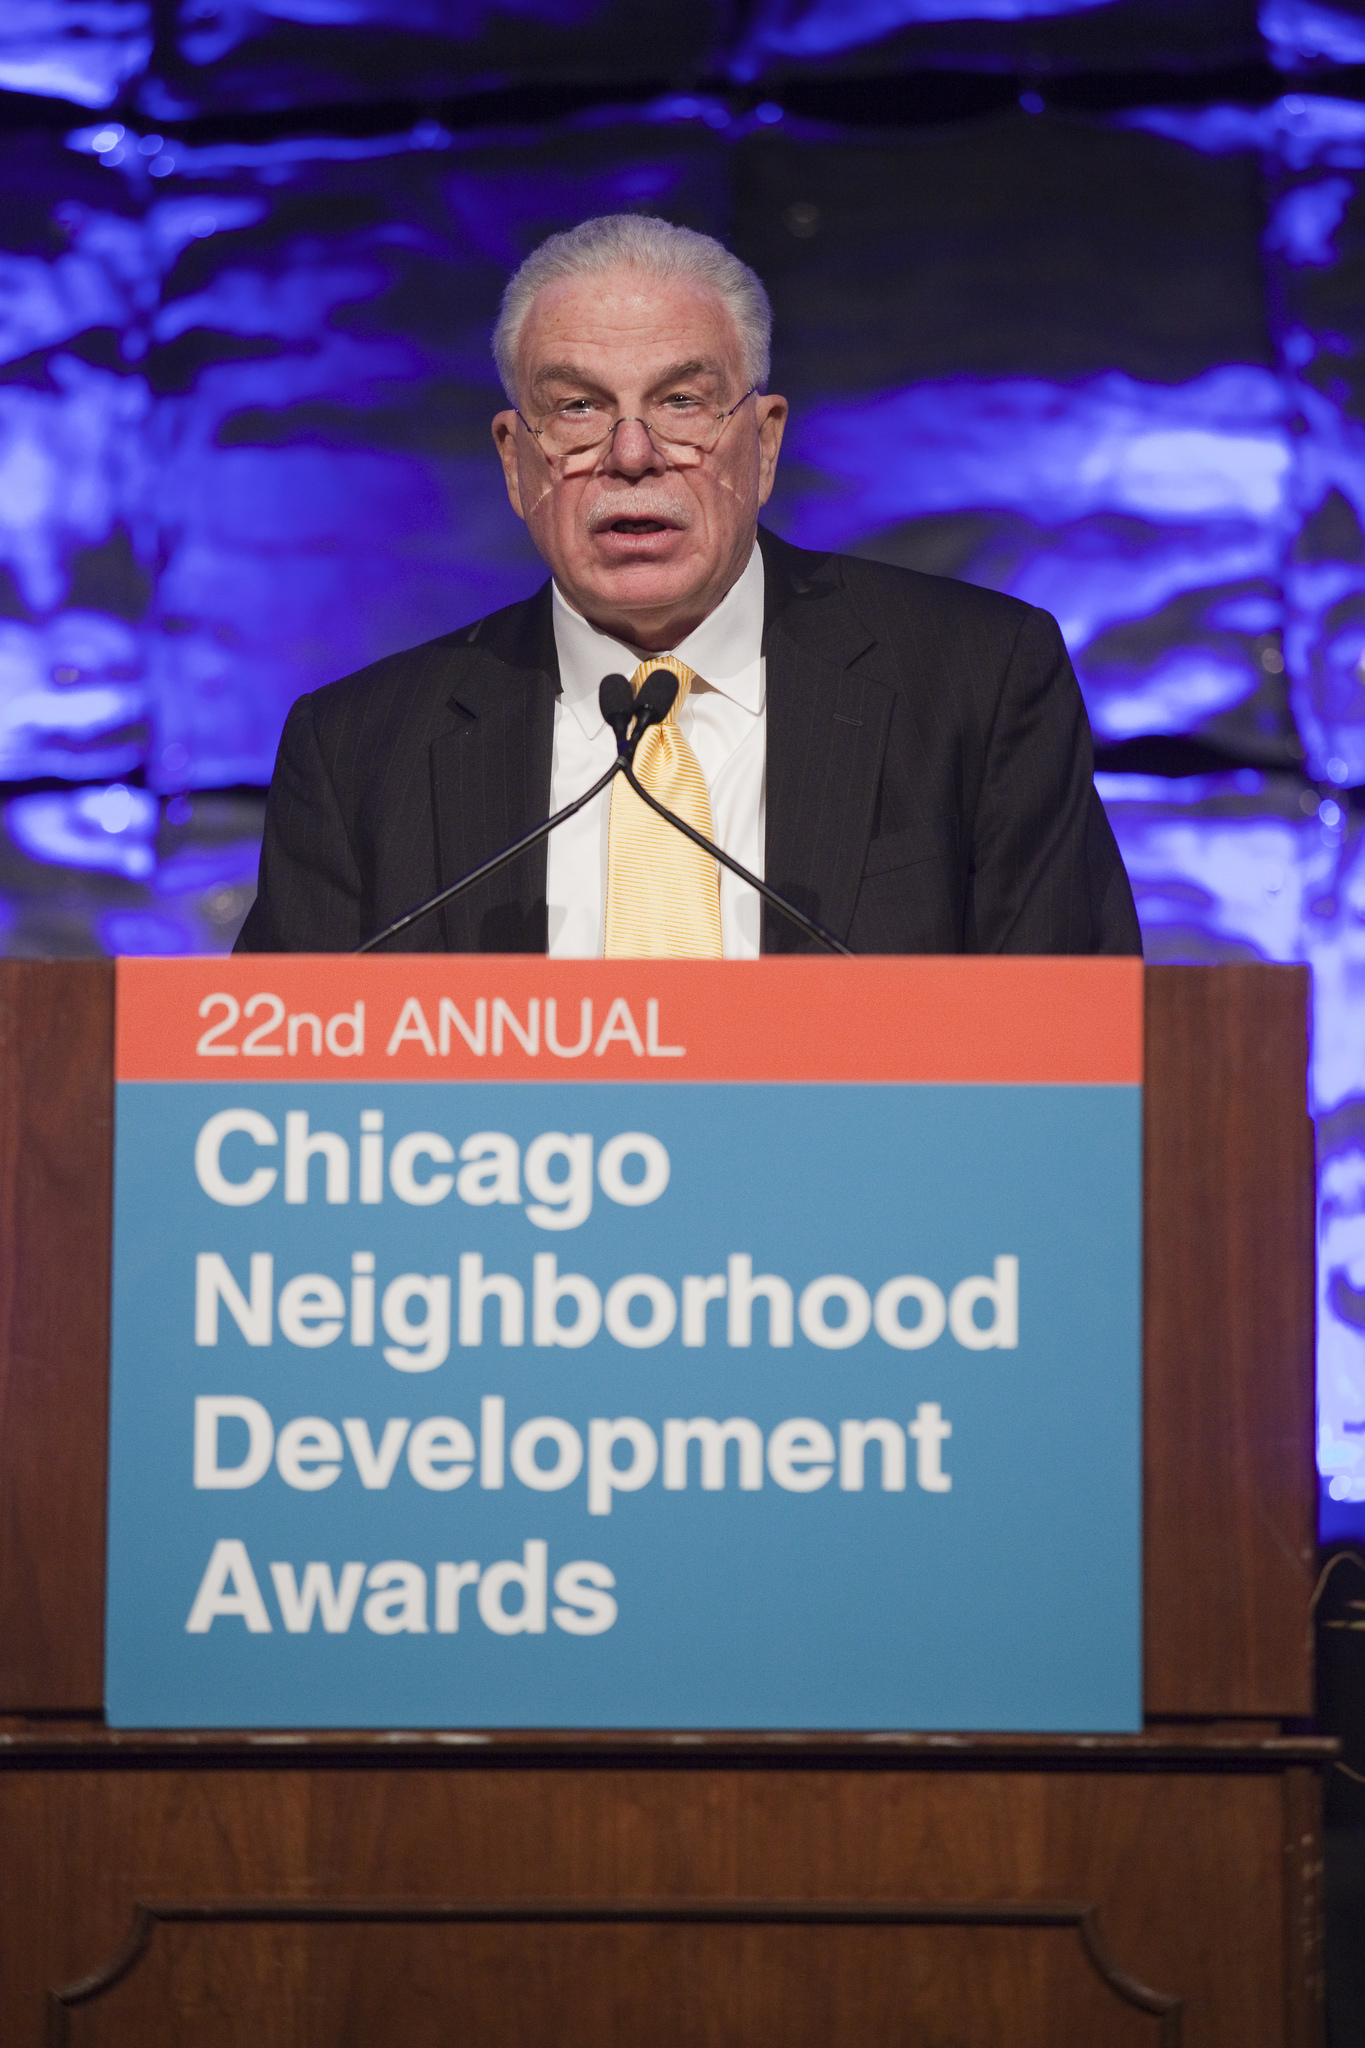 Andrew-Mooney-was-honored-with-the-Richard-M.-Daley-Friend-of-the-Neighborhoods-Award.jpg